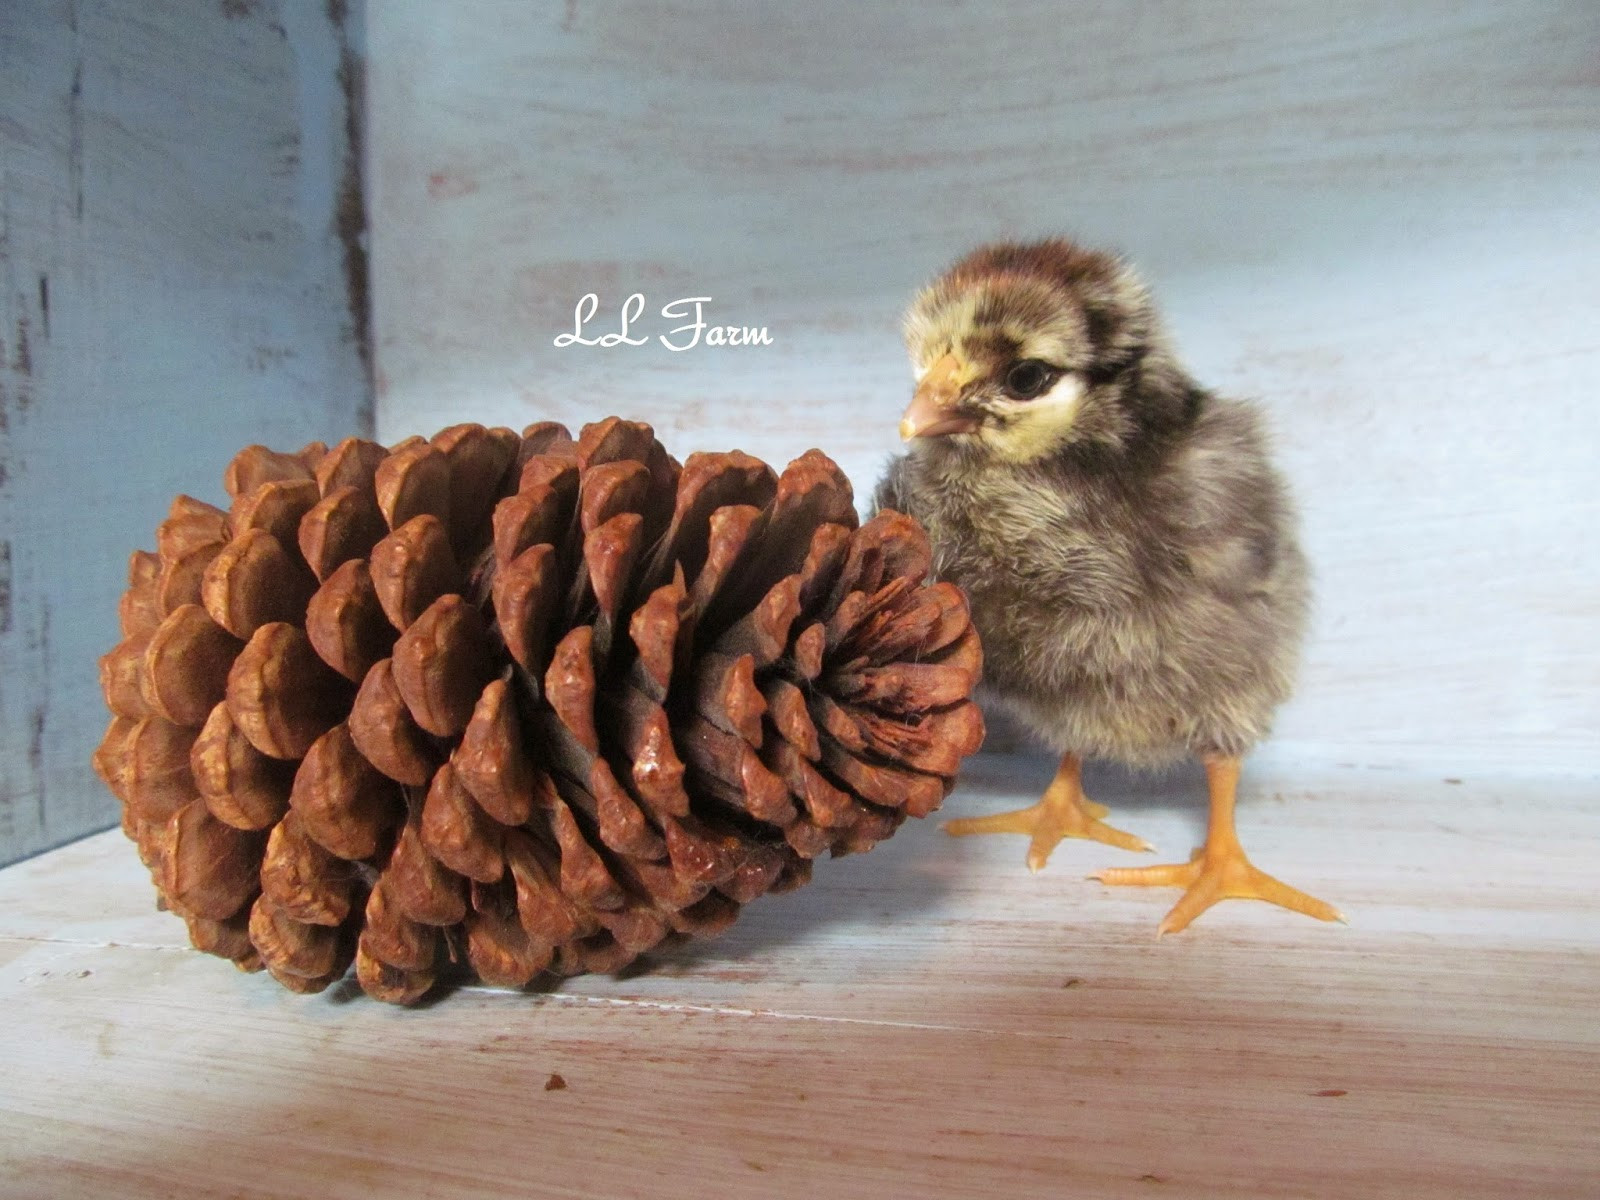 silver laced and a pine cone